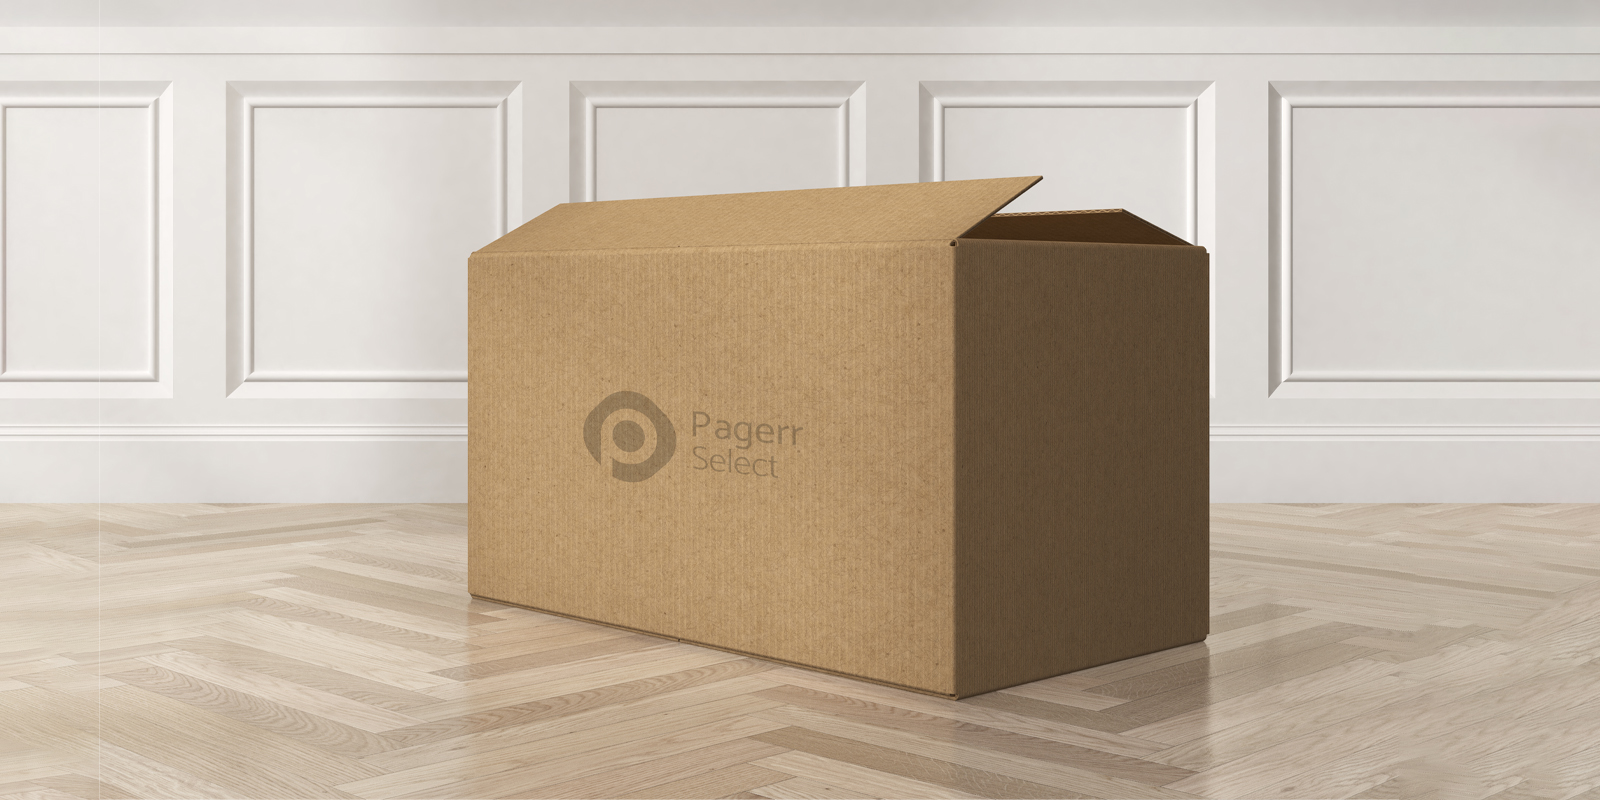 Moving boxes in Warsaw - Print with Pagerr